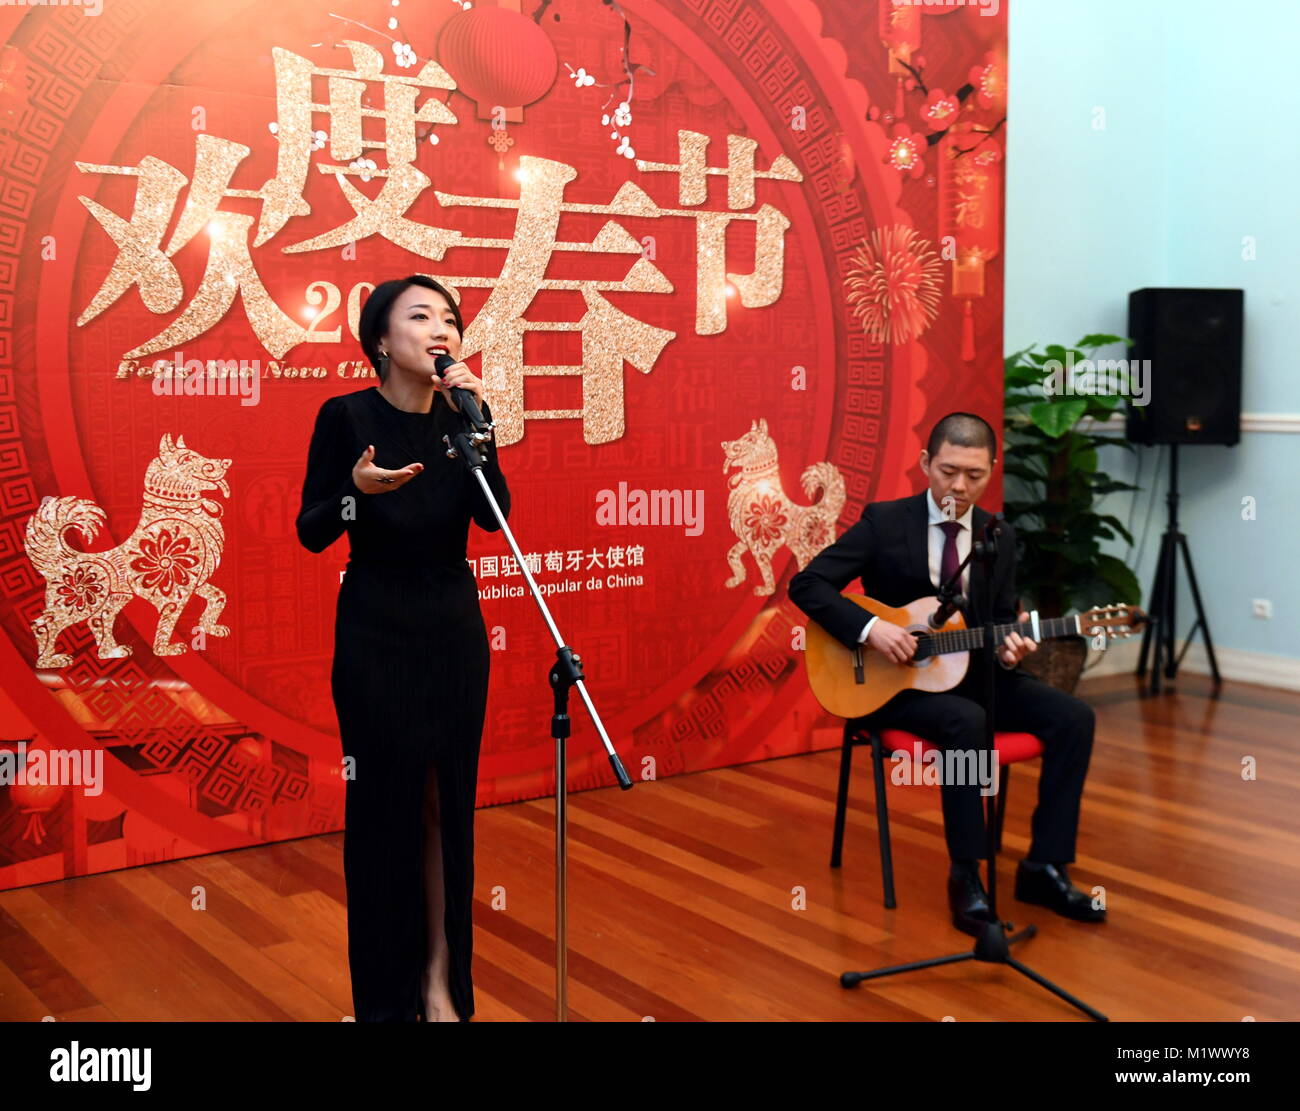 Lisbon, Portugal. 2nd Feb, 2018. People perform Portuguese Fado 'Lisbon - Beautiful Girl' during a Chinese New Year Gala at the Chinese Embassy in Lisbon, Portugal, Feb. 2, 2018. Credit: Zhang Liyun/Xinhua/Alamy Live News Stock Photo